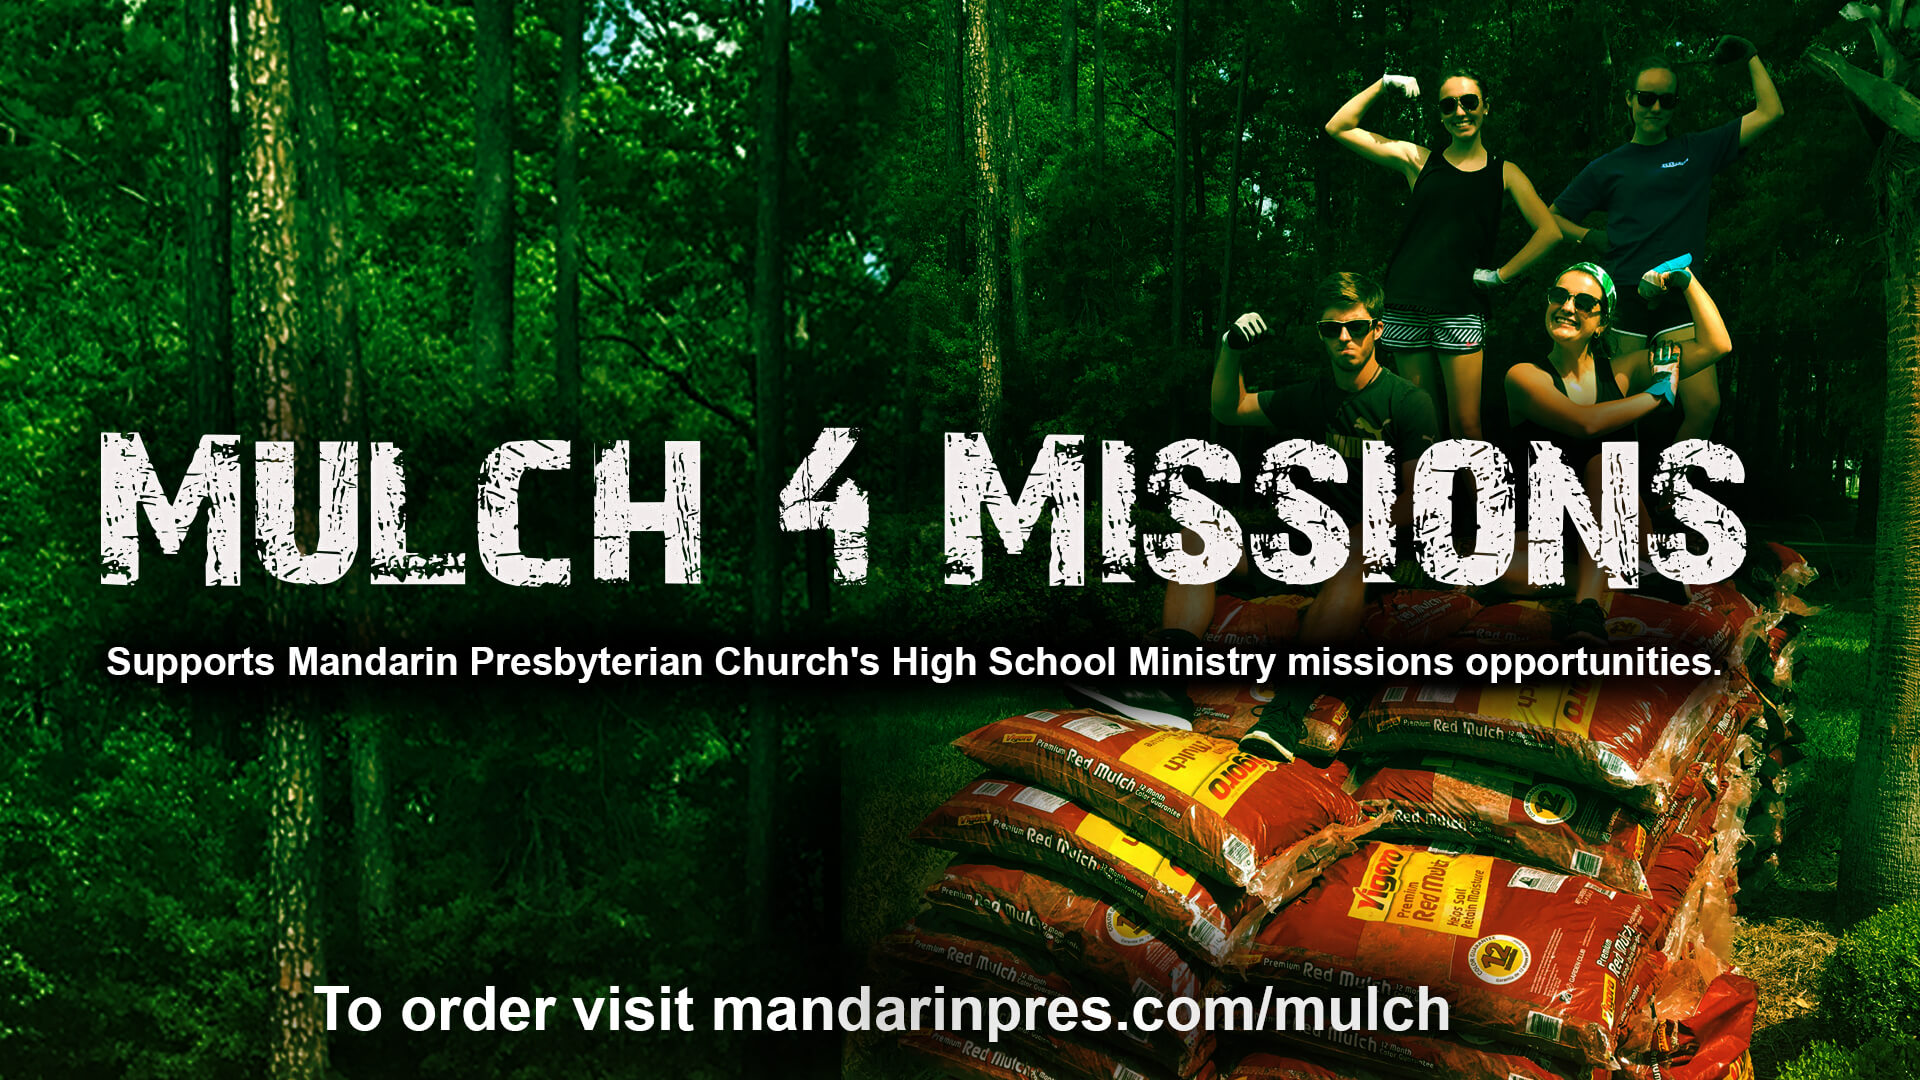 Mulch 4 Missions

This year was our 16th year of raising funds by selling mulch! We use these funds to support our overseas mission partners and send our high school students on summer mission trips.
